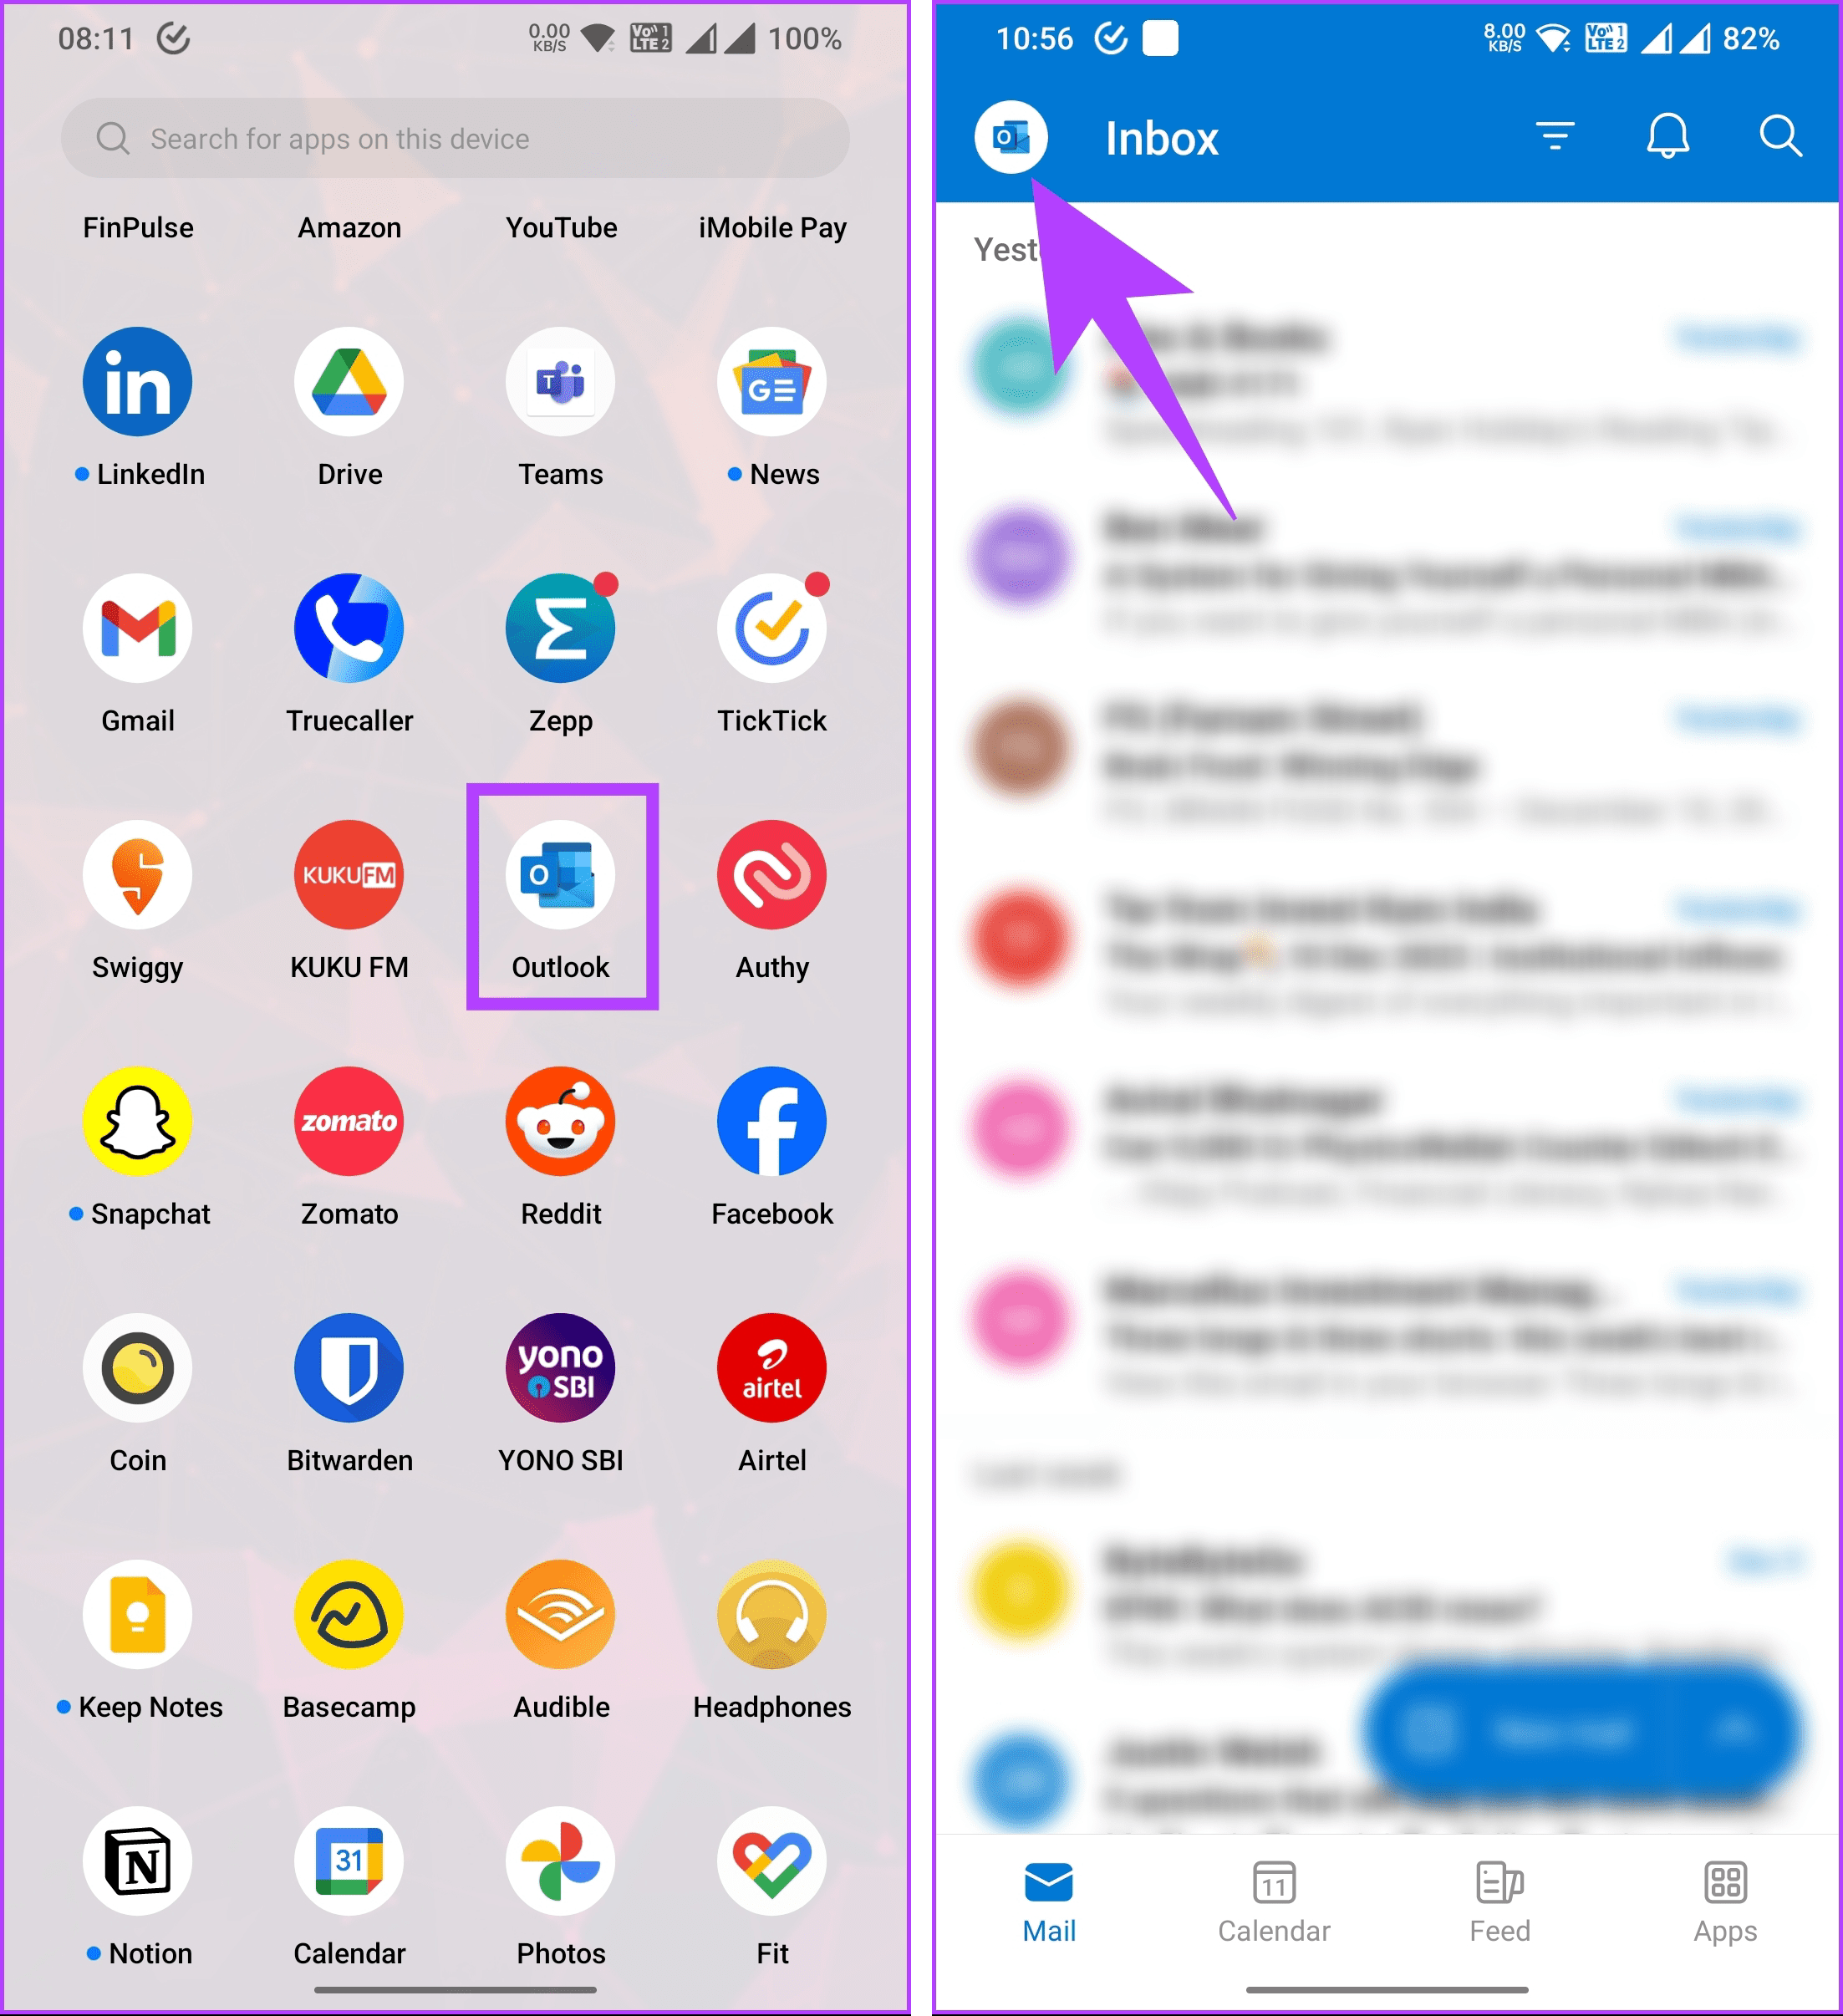 Launch the Microsoft Outlook app